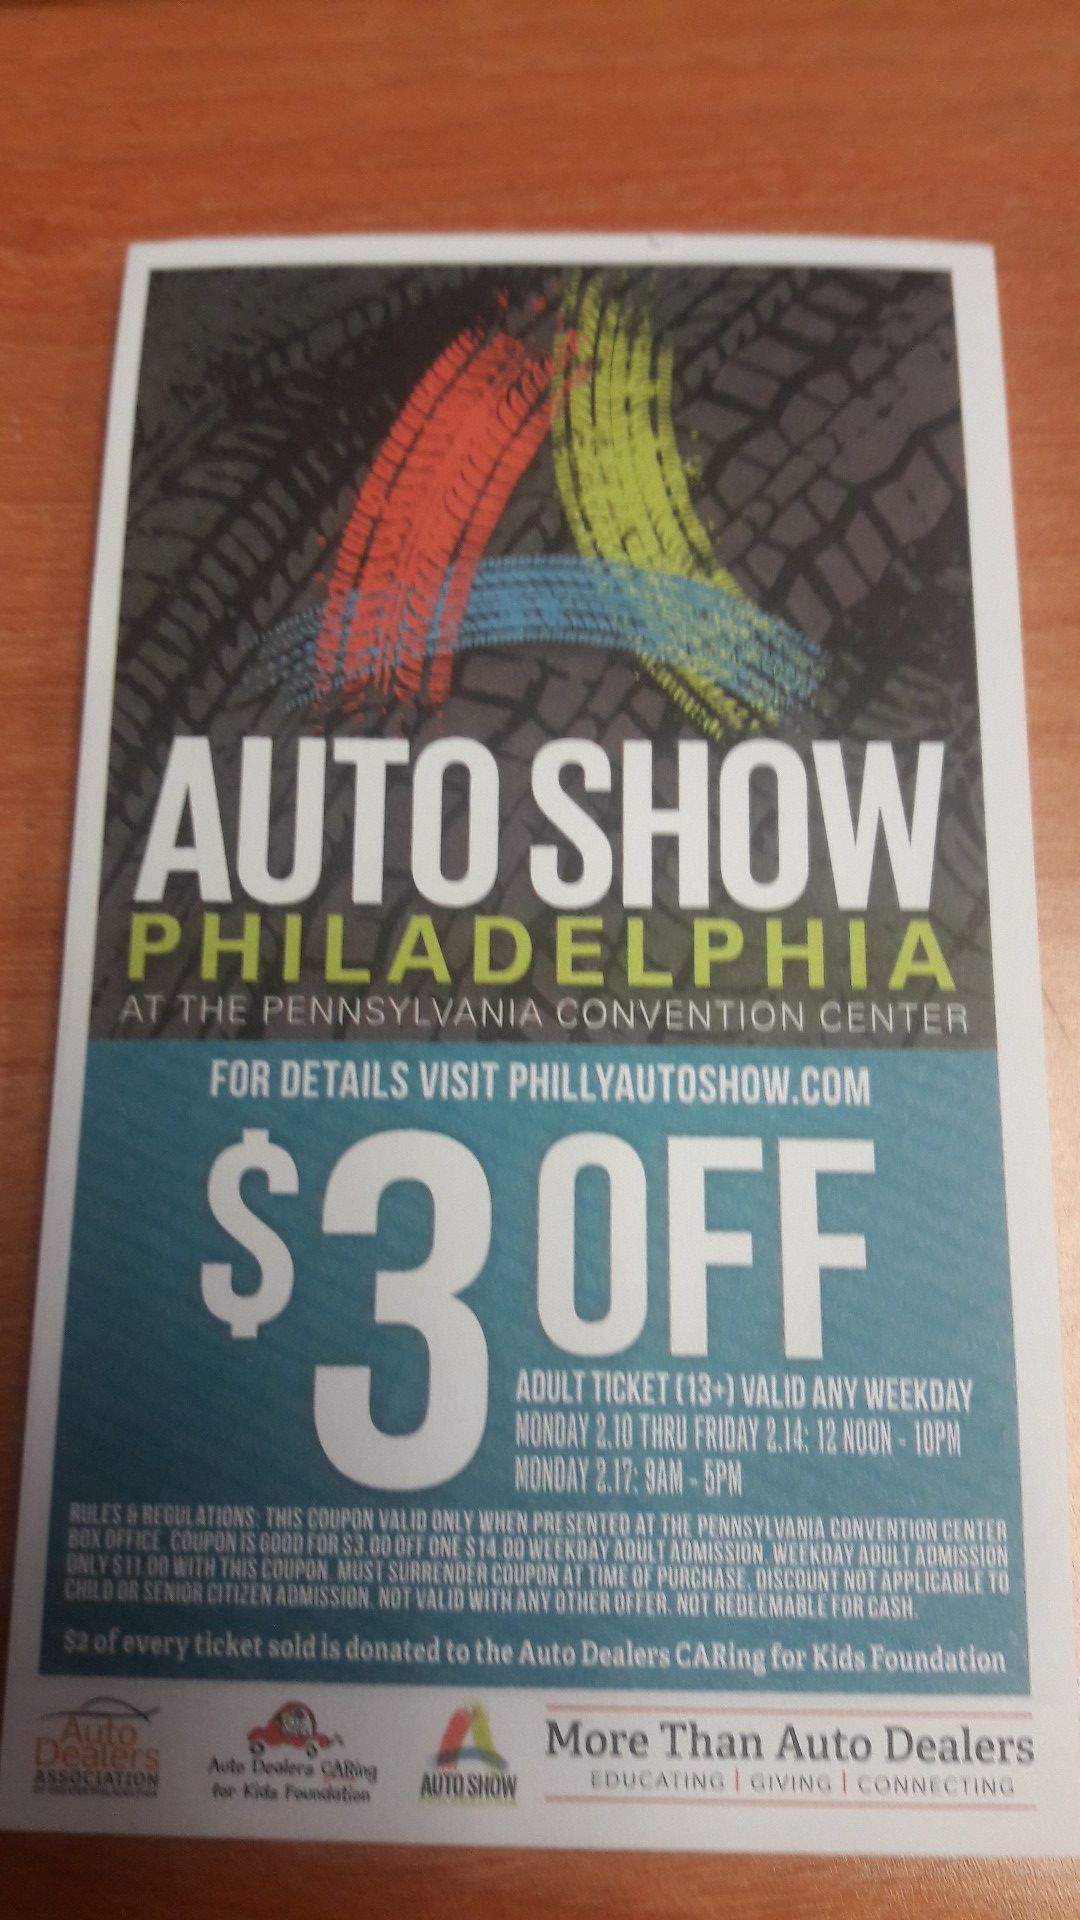 Philly auto show discounts